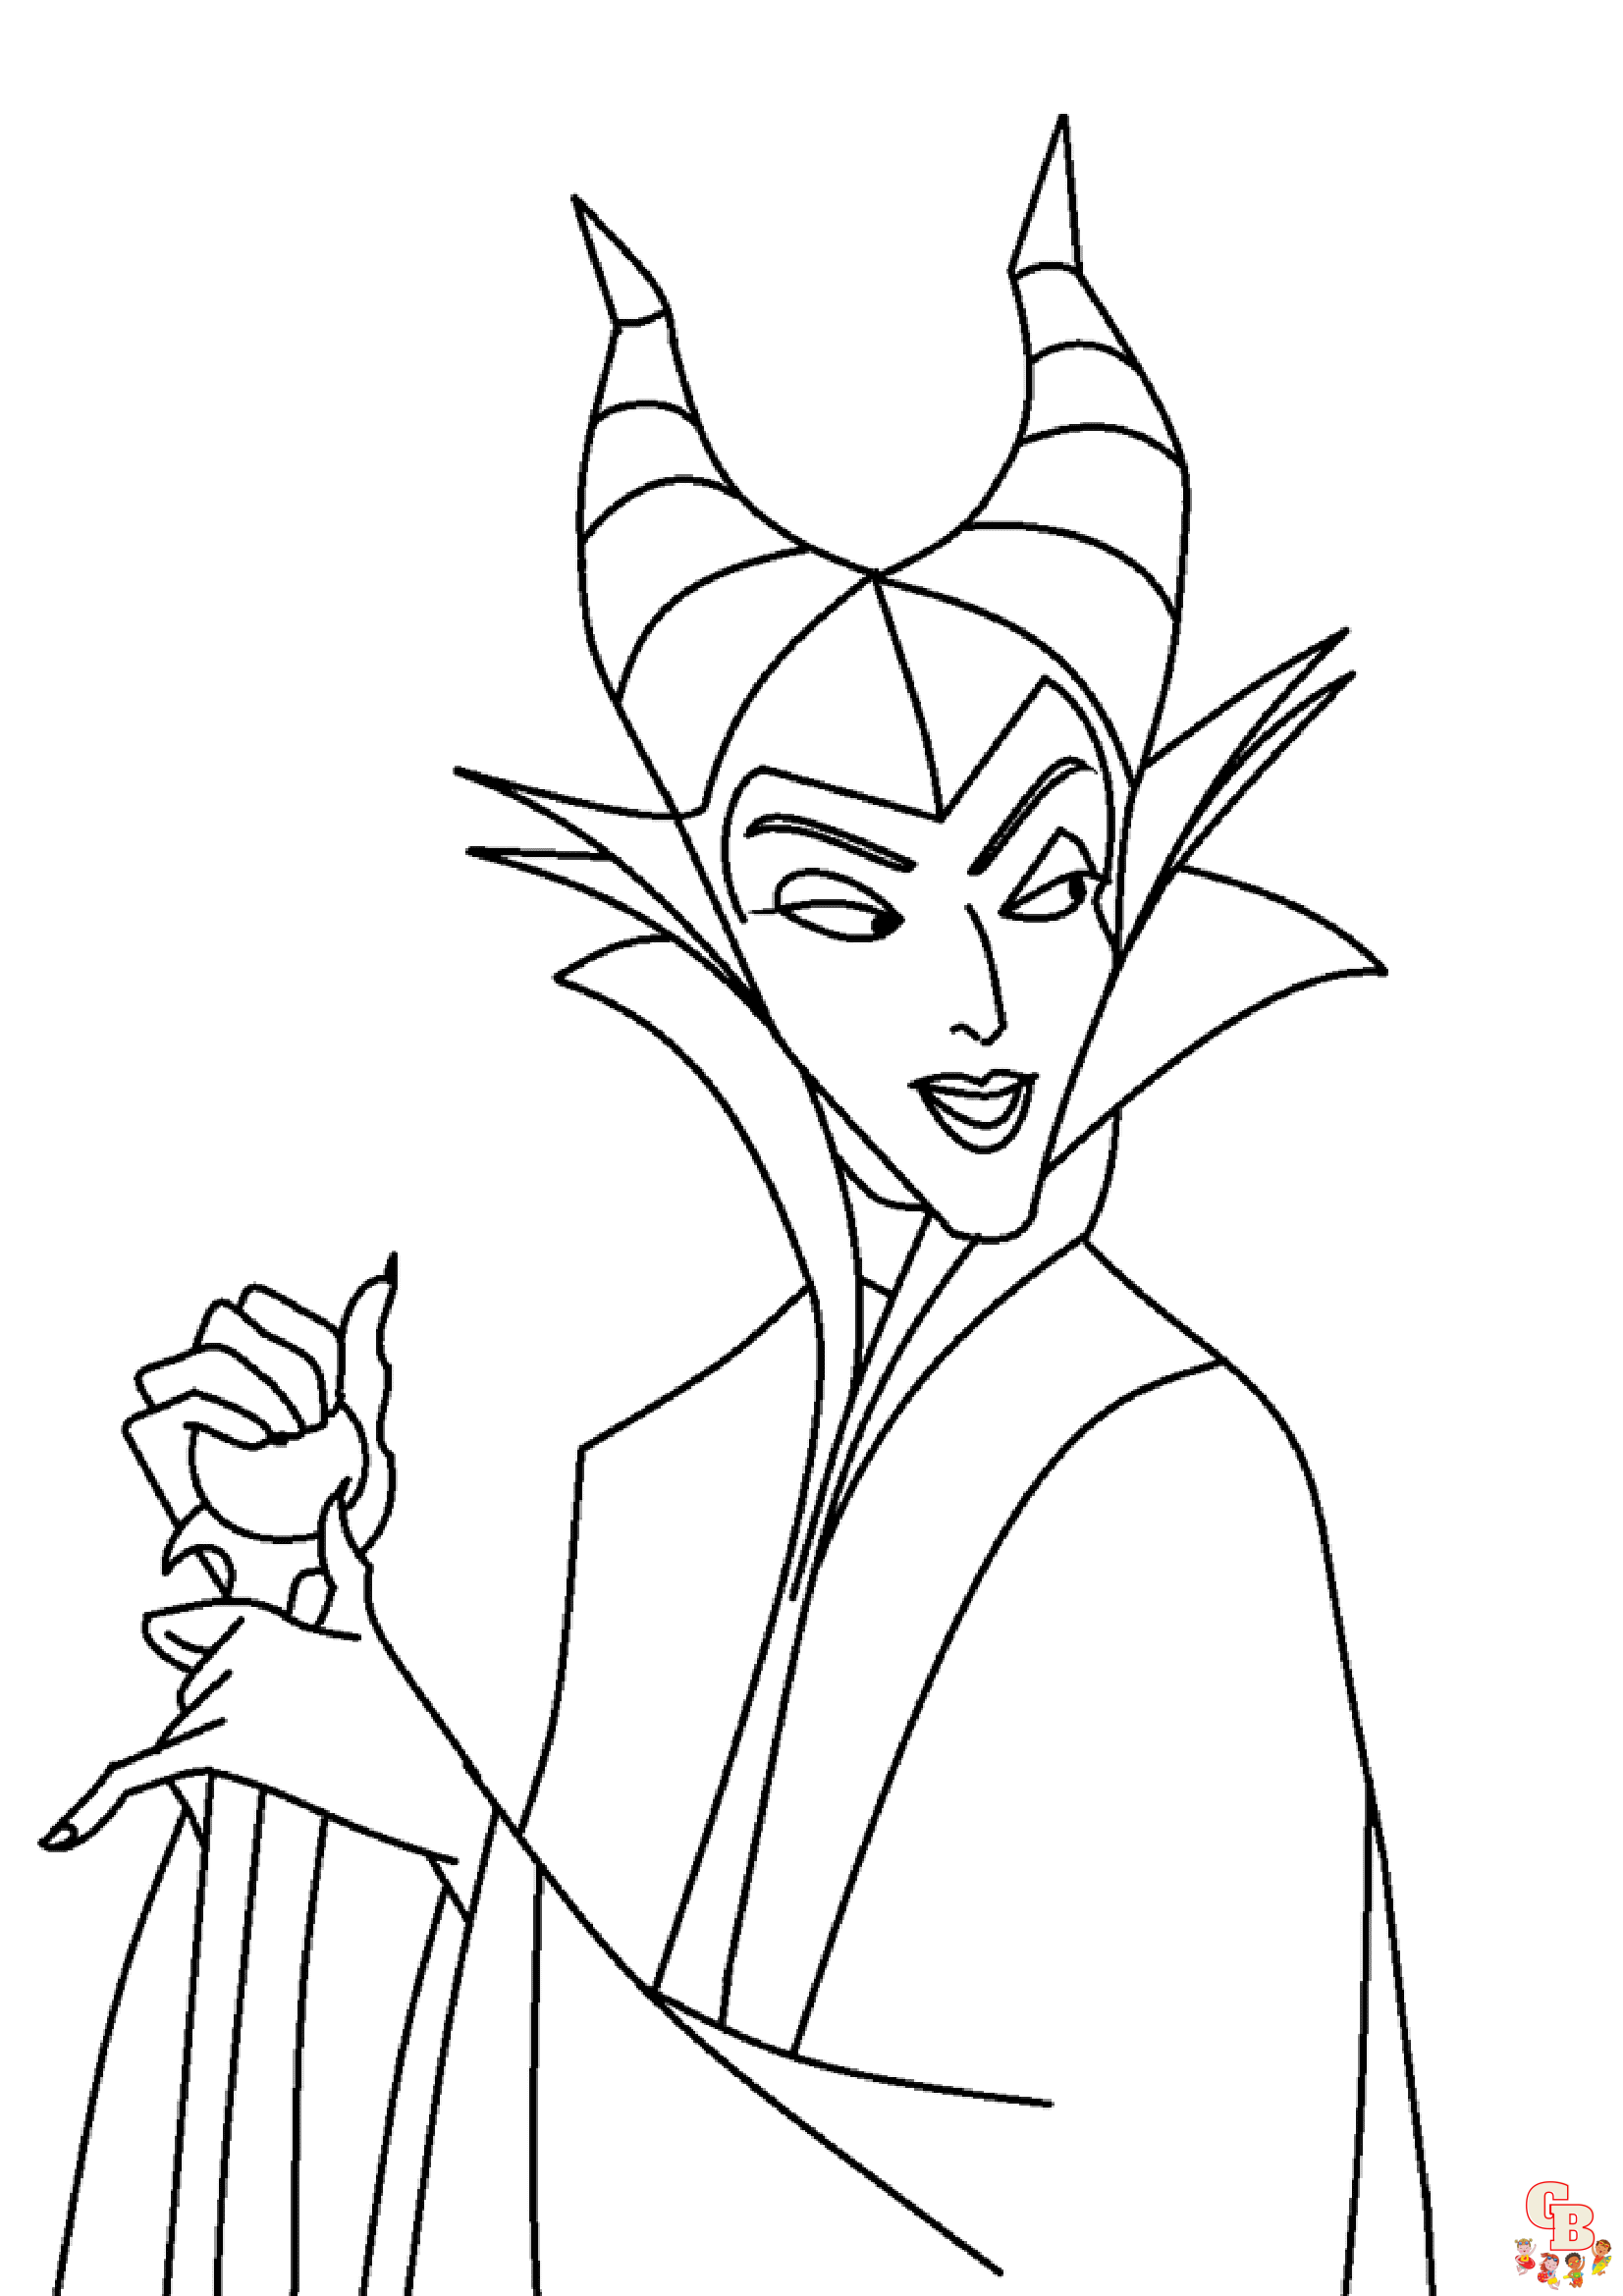 Maleficent Coloring Pages 2